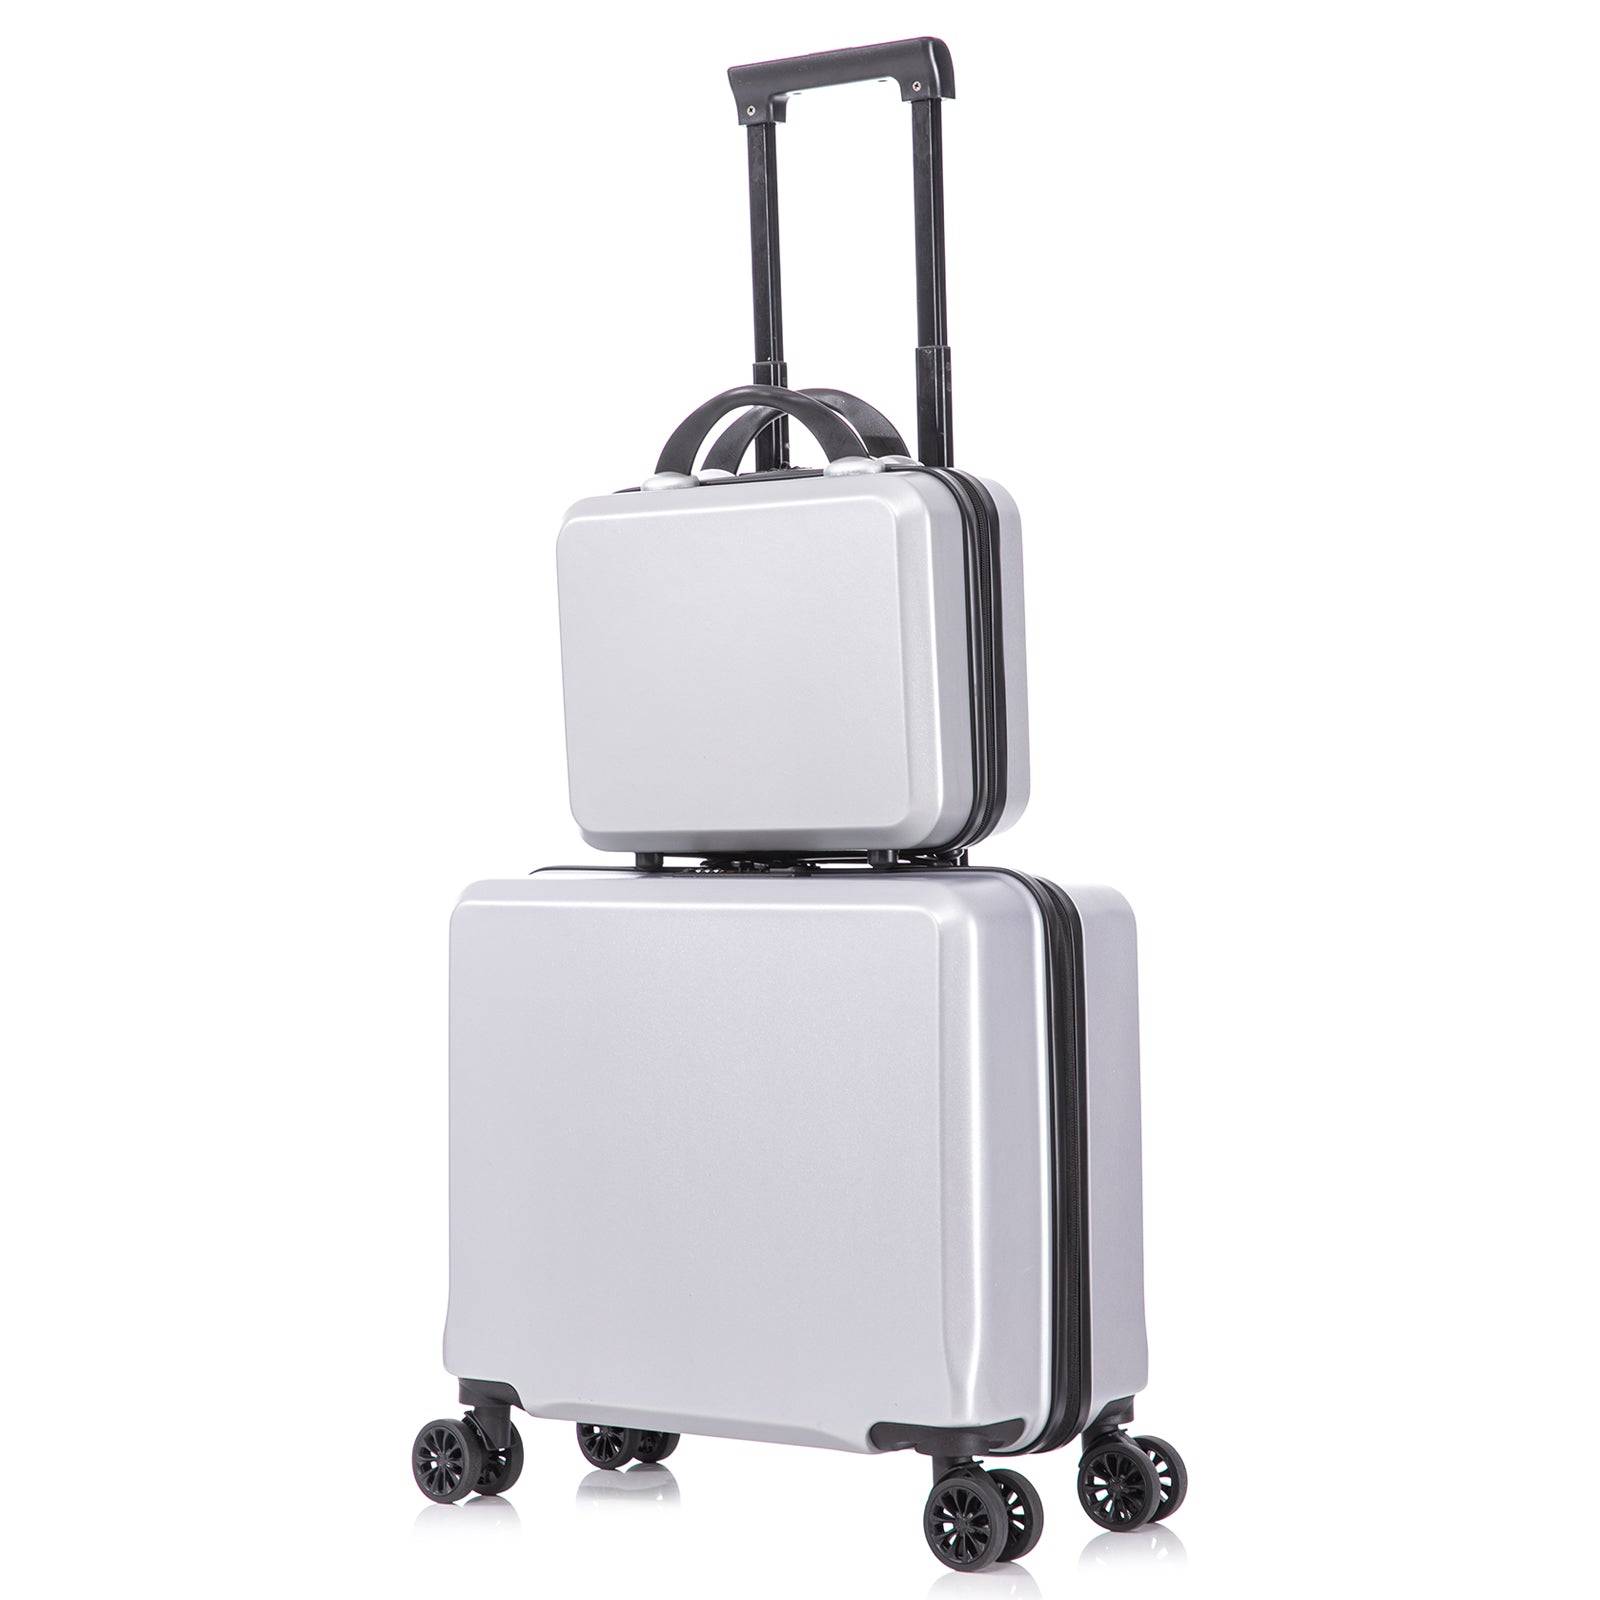 2 Piece Travel Luggage Set Hardshell Suitcase with Spinner Wheels 18” Underseat luggage and 14” Cosmetic Travel case Toiletry box Silver